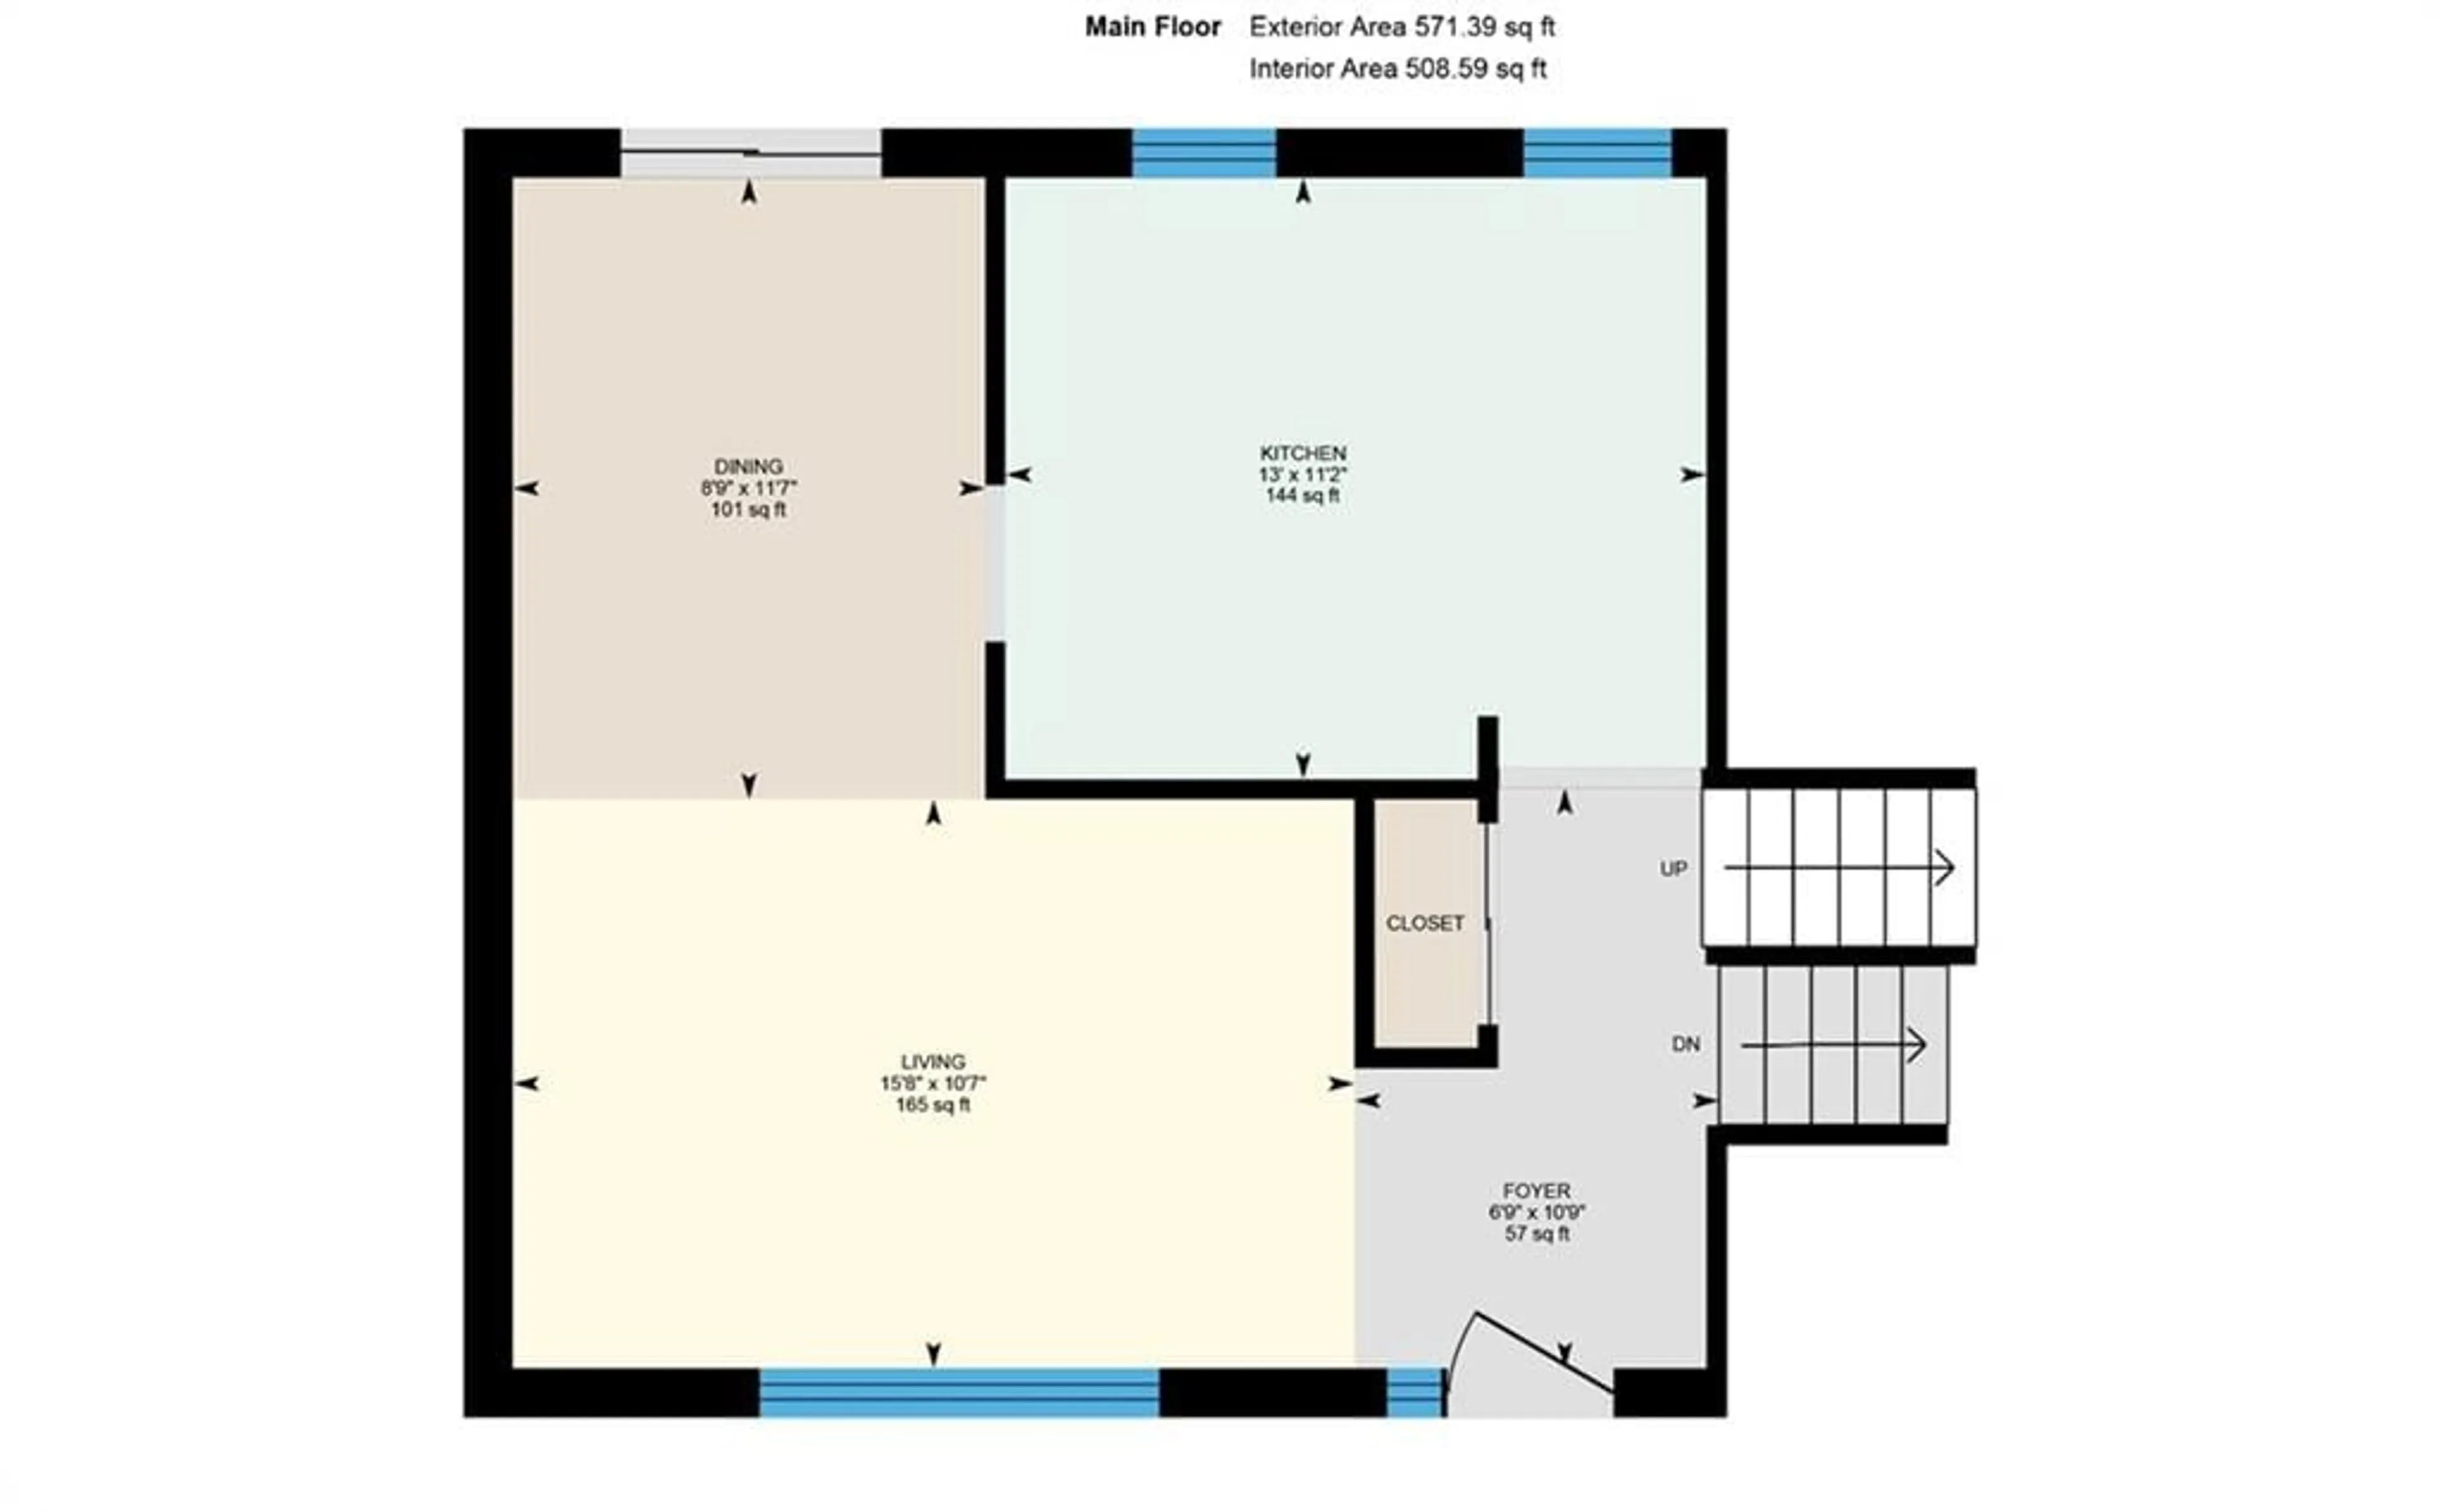 Floor plan for 13 Cooks Dr, Leaskdale Ontario L0C 1C0